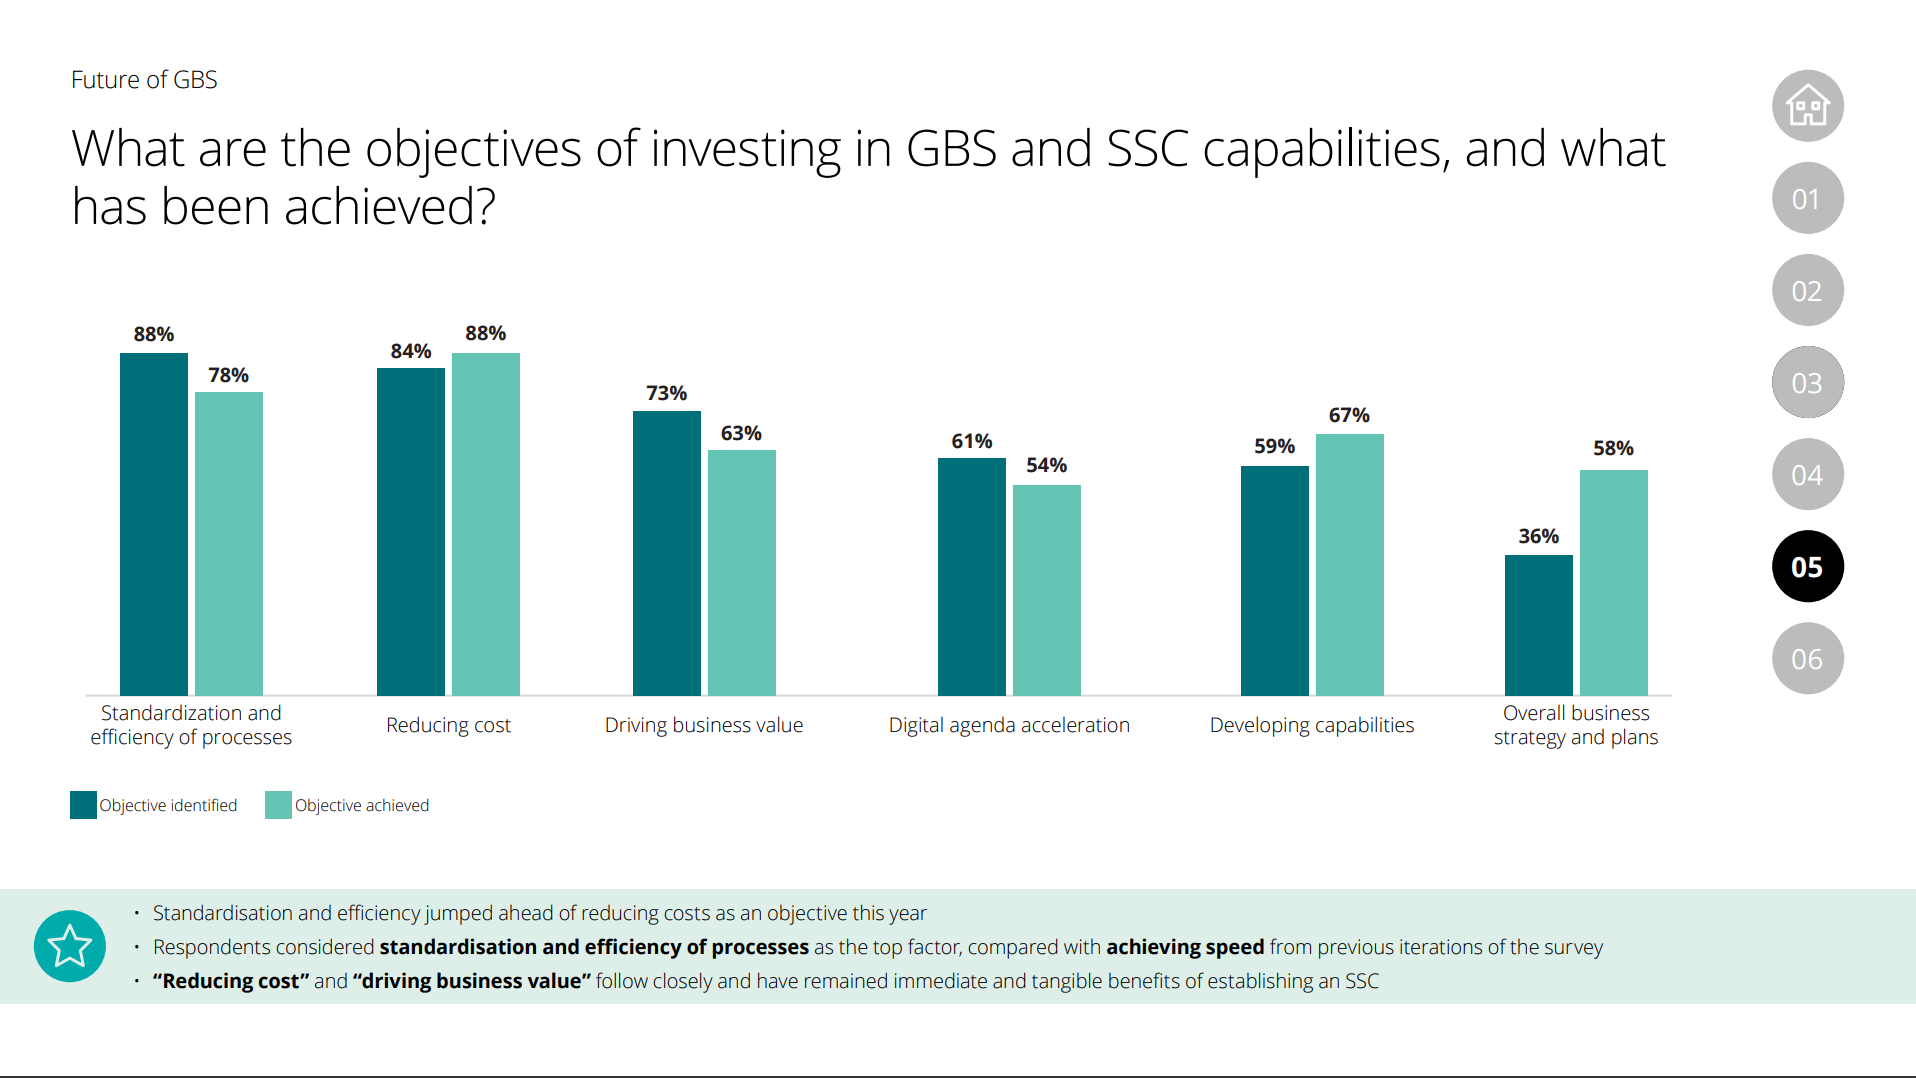 What are the objectives of investing in GBS and SSC capabilities, and what has been achieved?